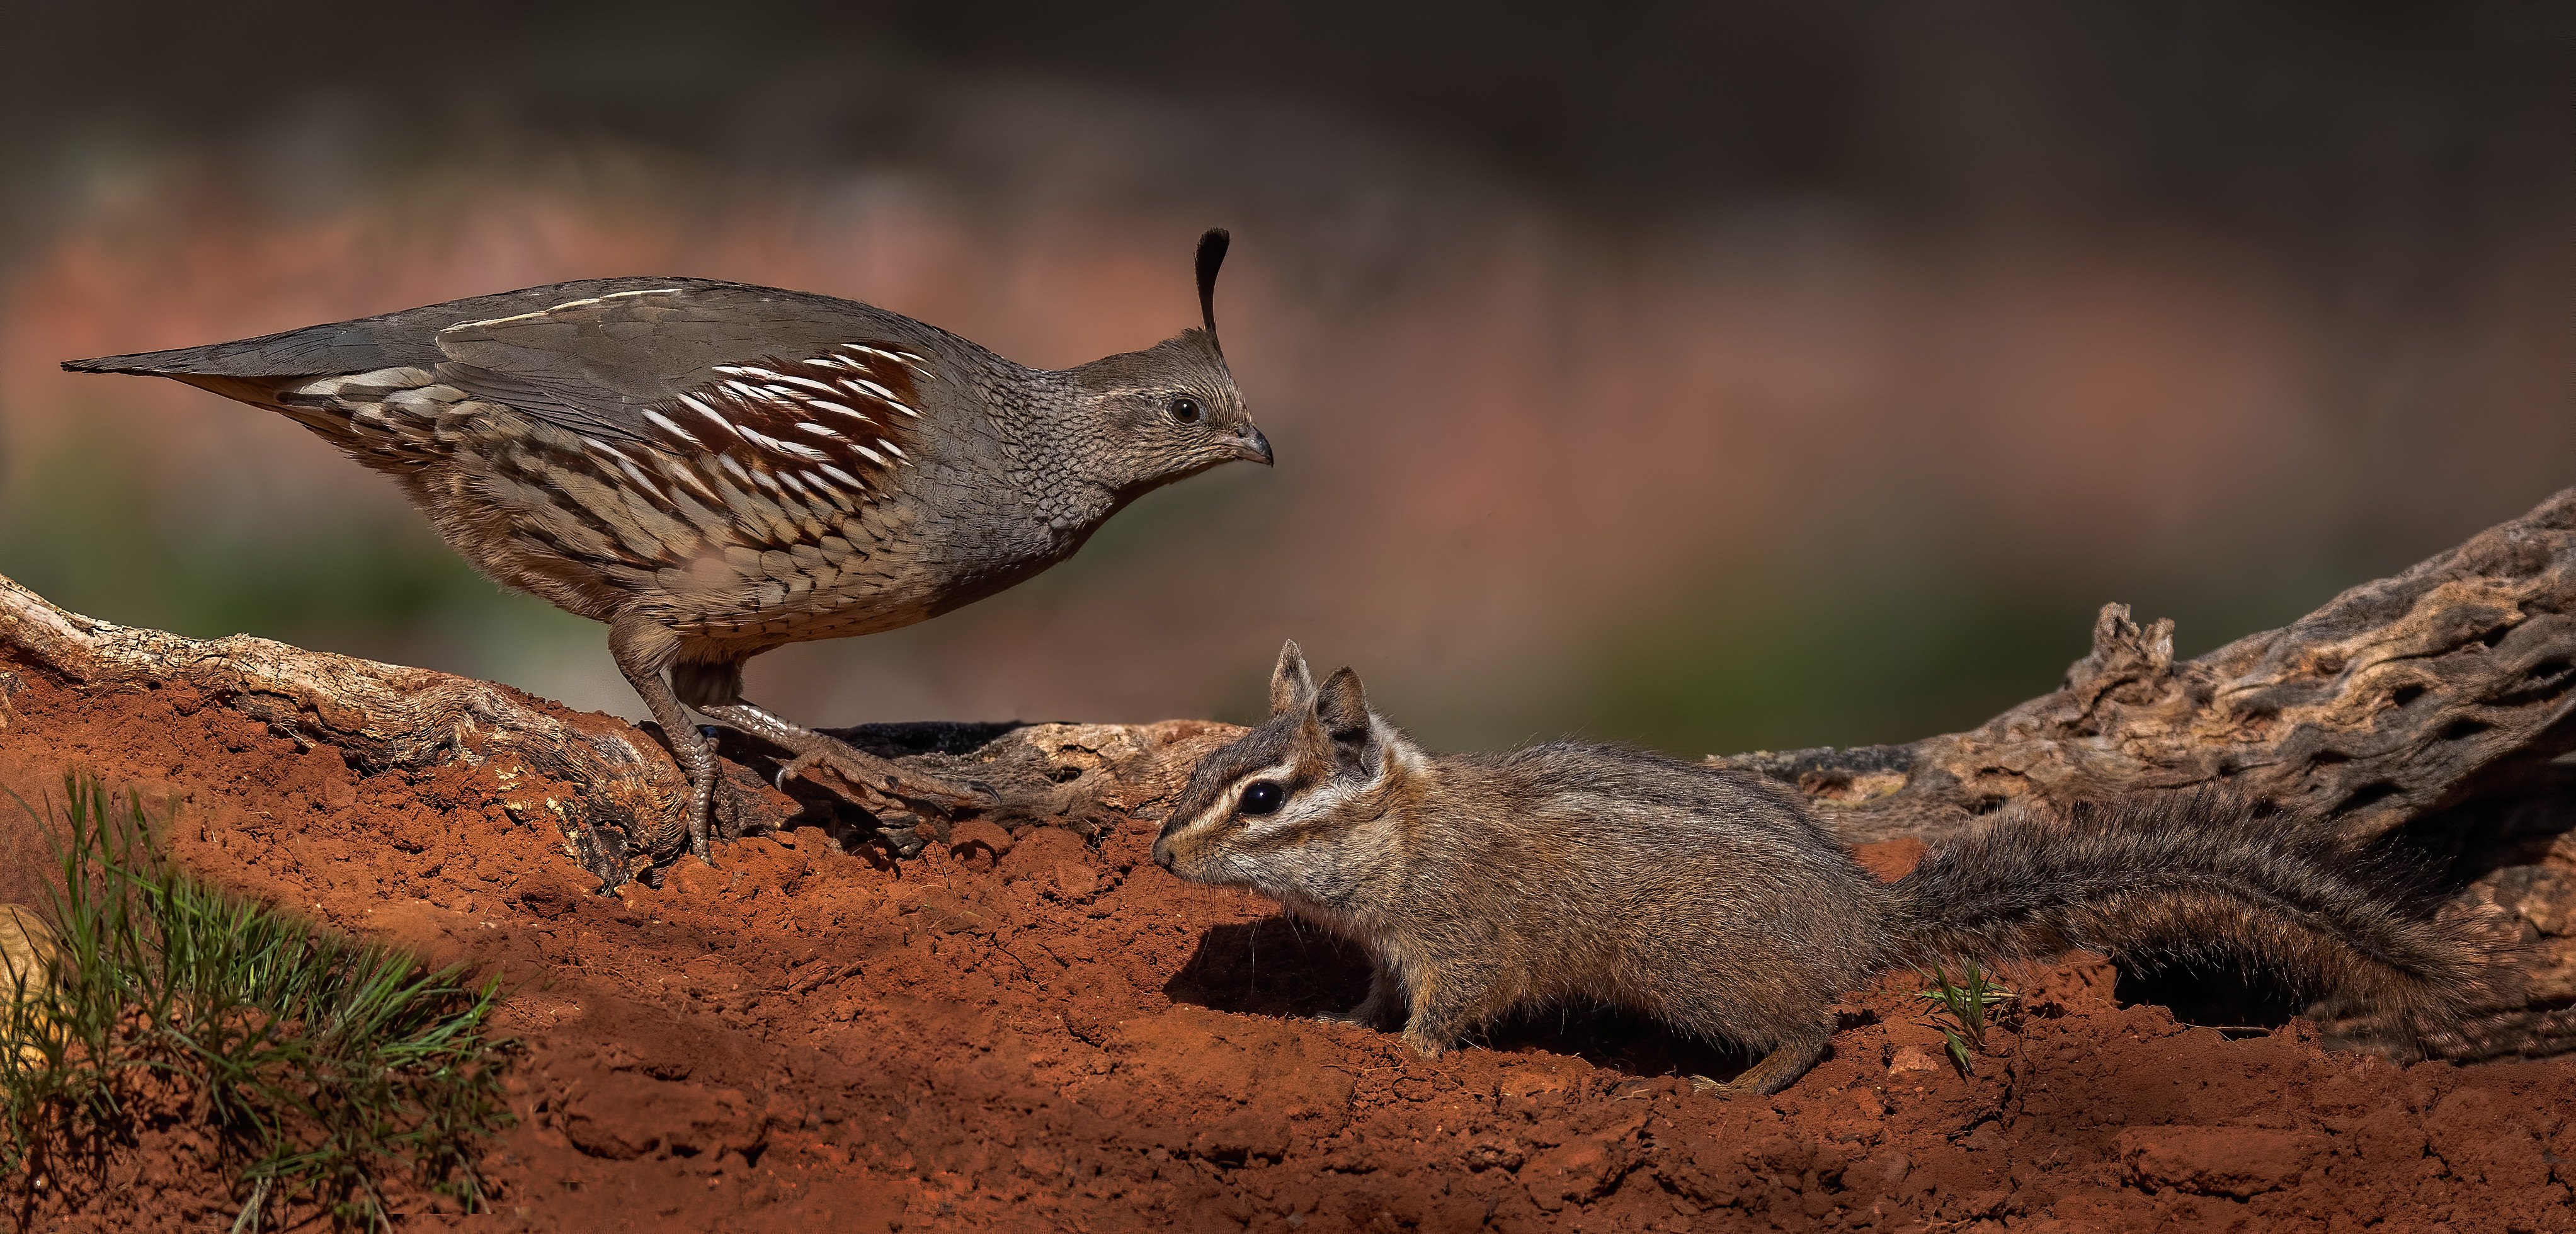 Wallpapers Quail and squirrel animal bird living world on the desktop